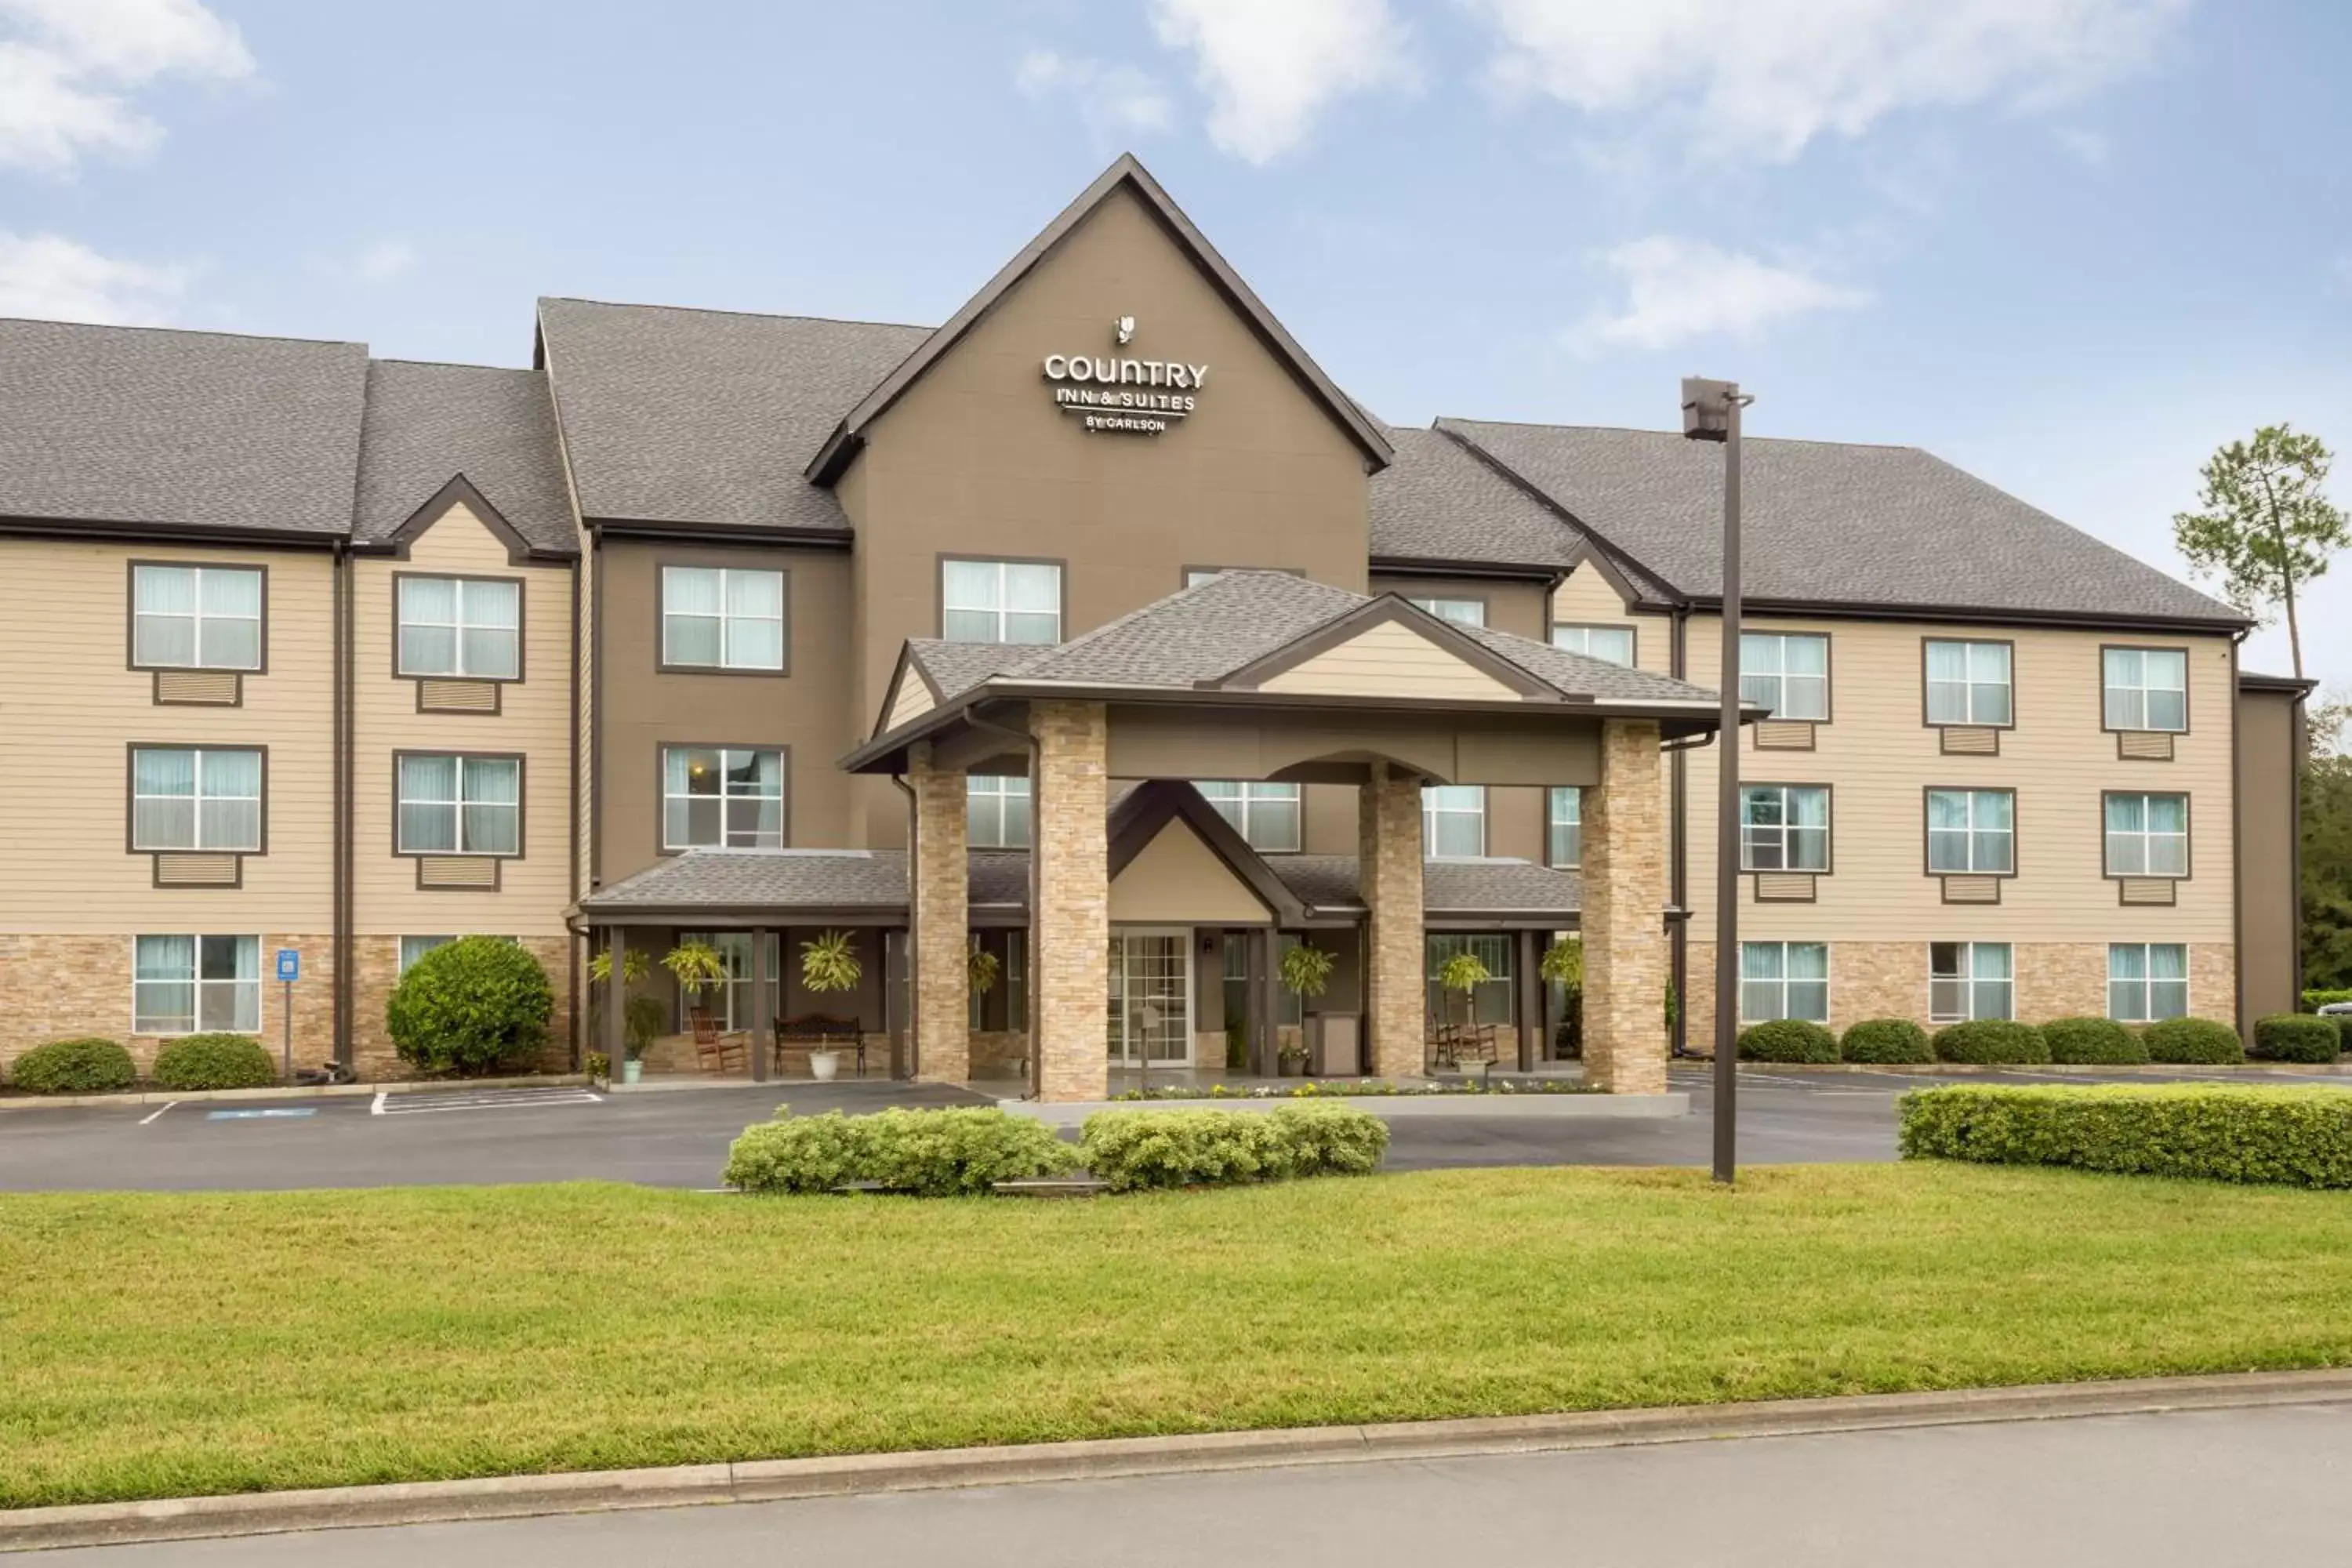 Facade/entrance, Property Building in Country Inn & Suites by Radisson, Kingsland, GA